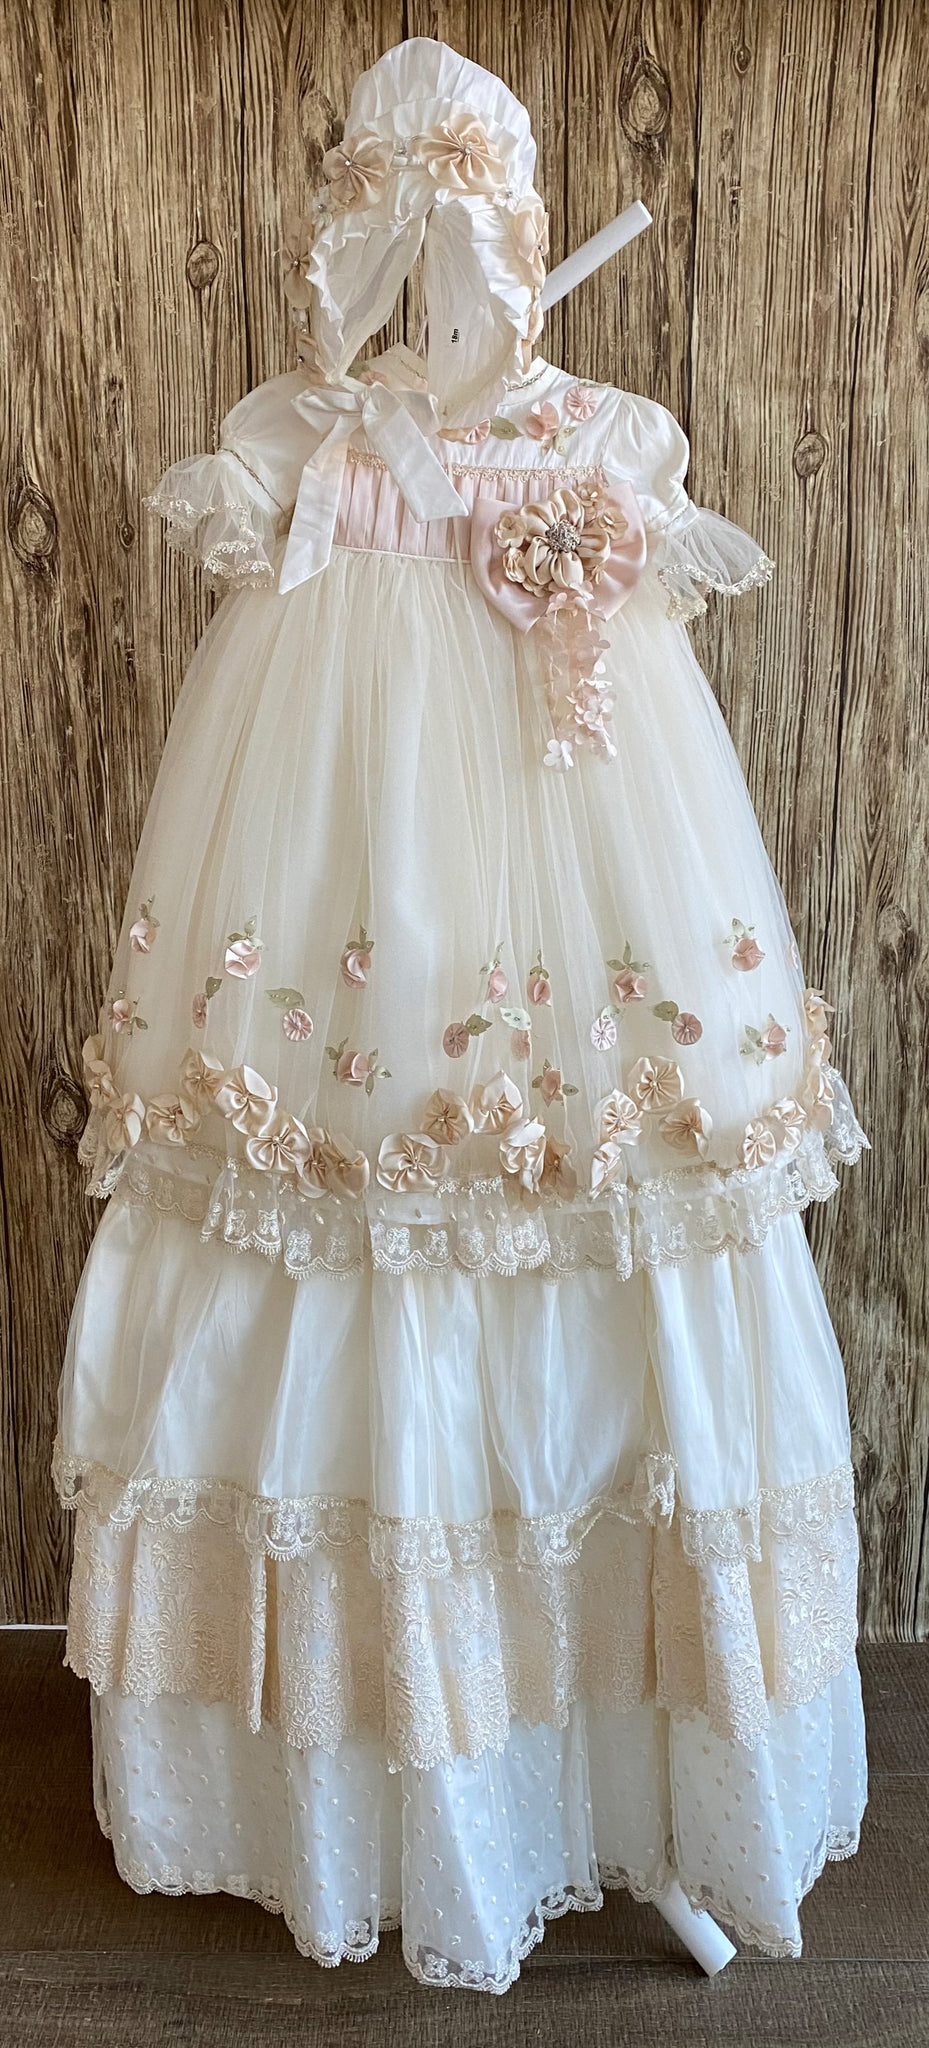 This a beautiful, one-of-a-kind baptism gown.  A lovely gown for a precious child.  Dress, Ivory, size 12M Satin bodice with dusty rose pleating  Organza flowers along bodice Satin puff sleeve with tulle brim Large dusty rose bow with Champaign flower center Tulle skirting with leaf detailing Dusty rose flowers along skirting bottom Slip  Satin bodice Layer one- satin with lace trim Layer two- embroidered lace Layer three- satin with dotted mesh overlay 